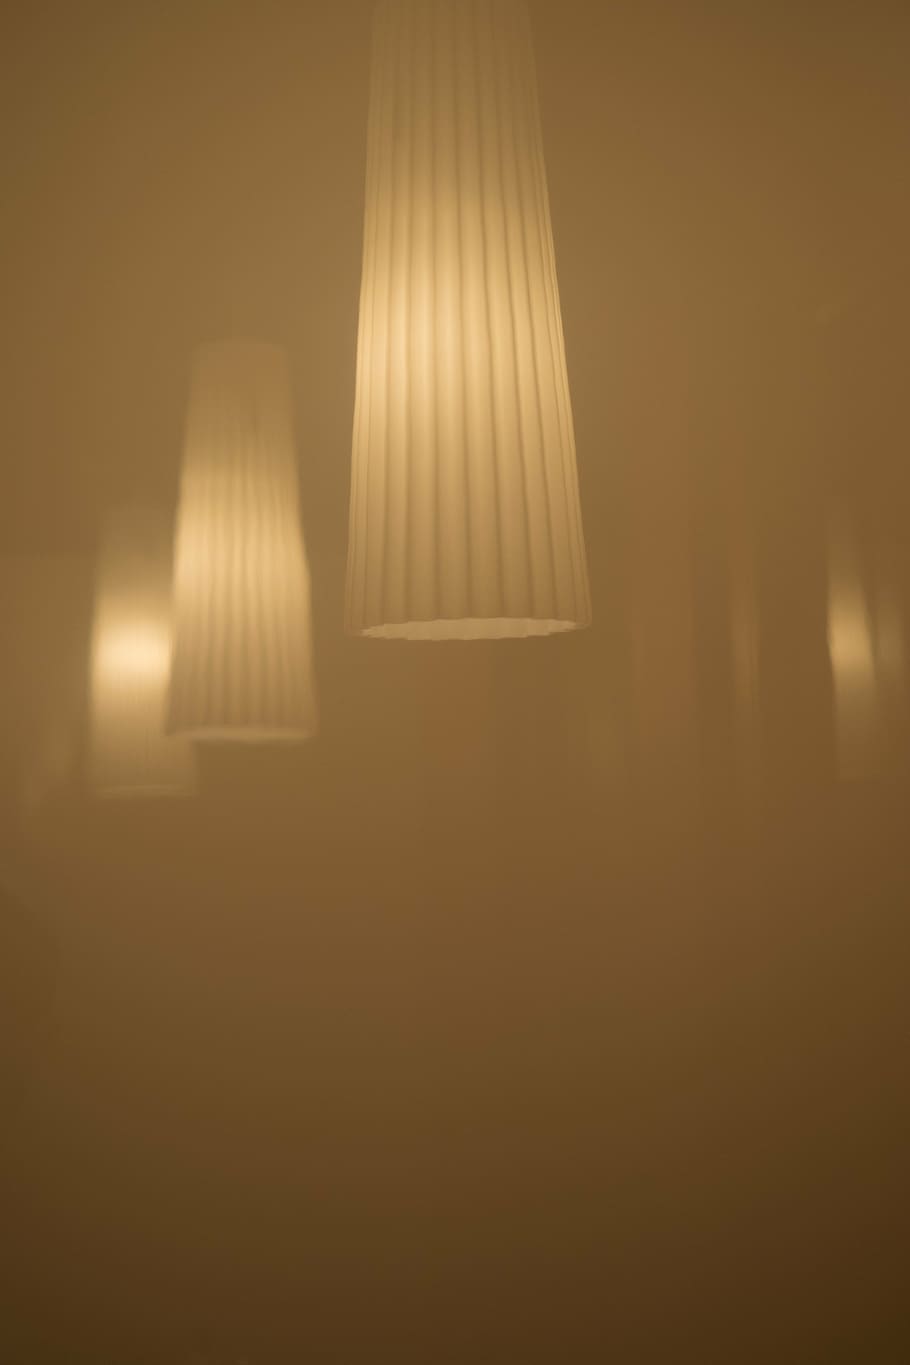 lamps, mirror, mirroring, foggy, colourless, background, light